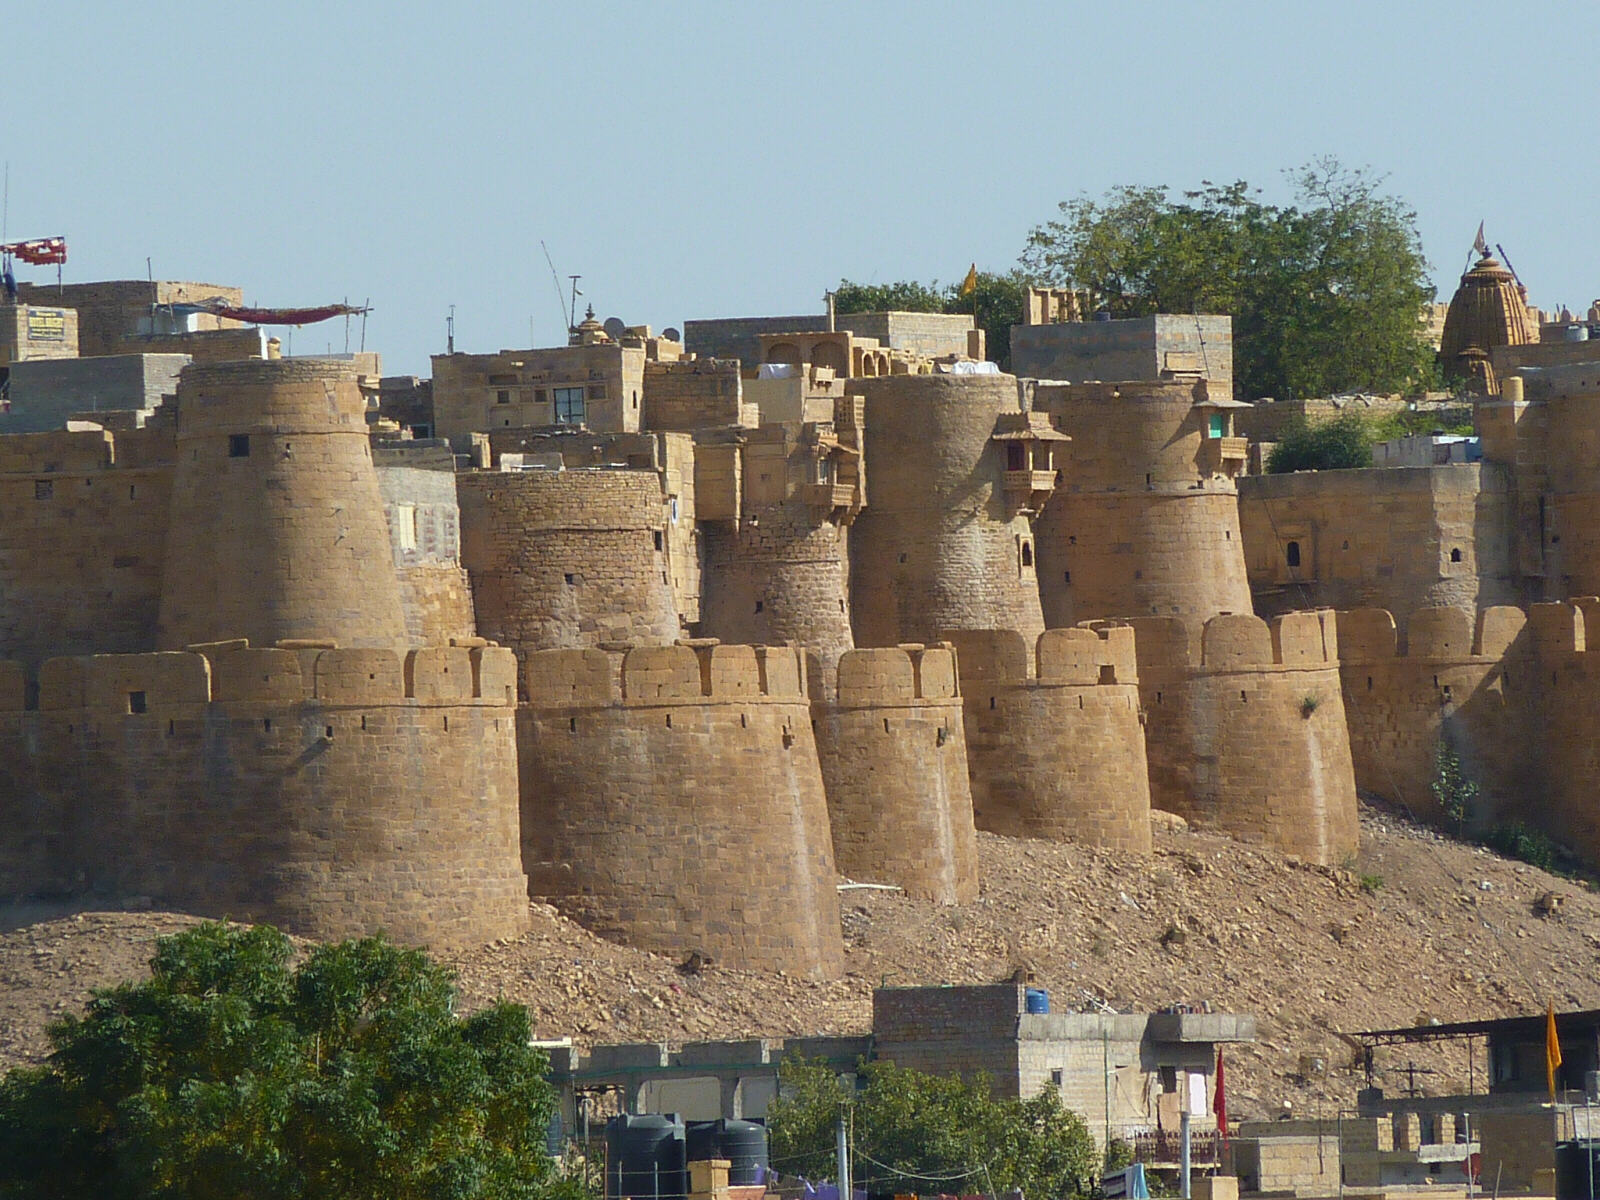 The fort in Jaisalmer, Rajasthan, India